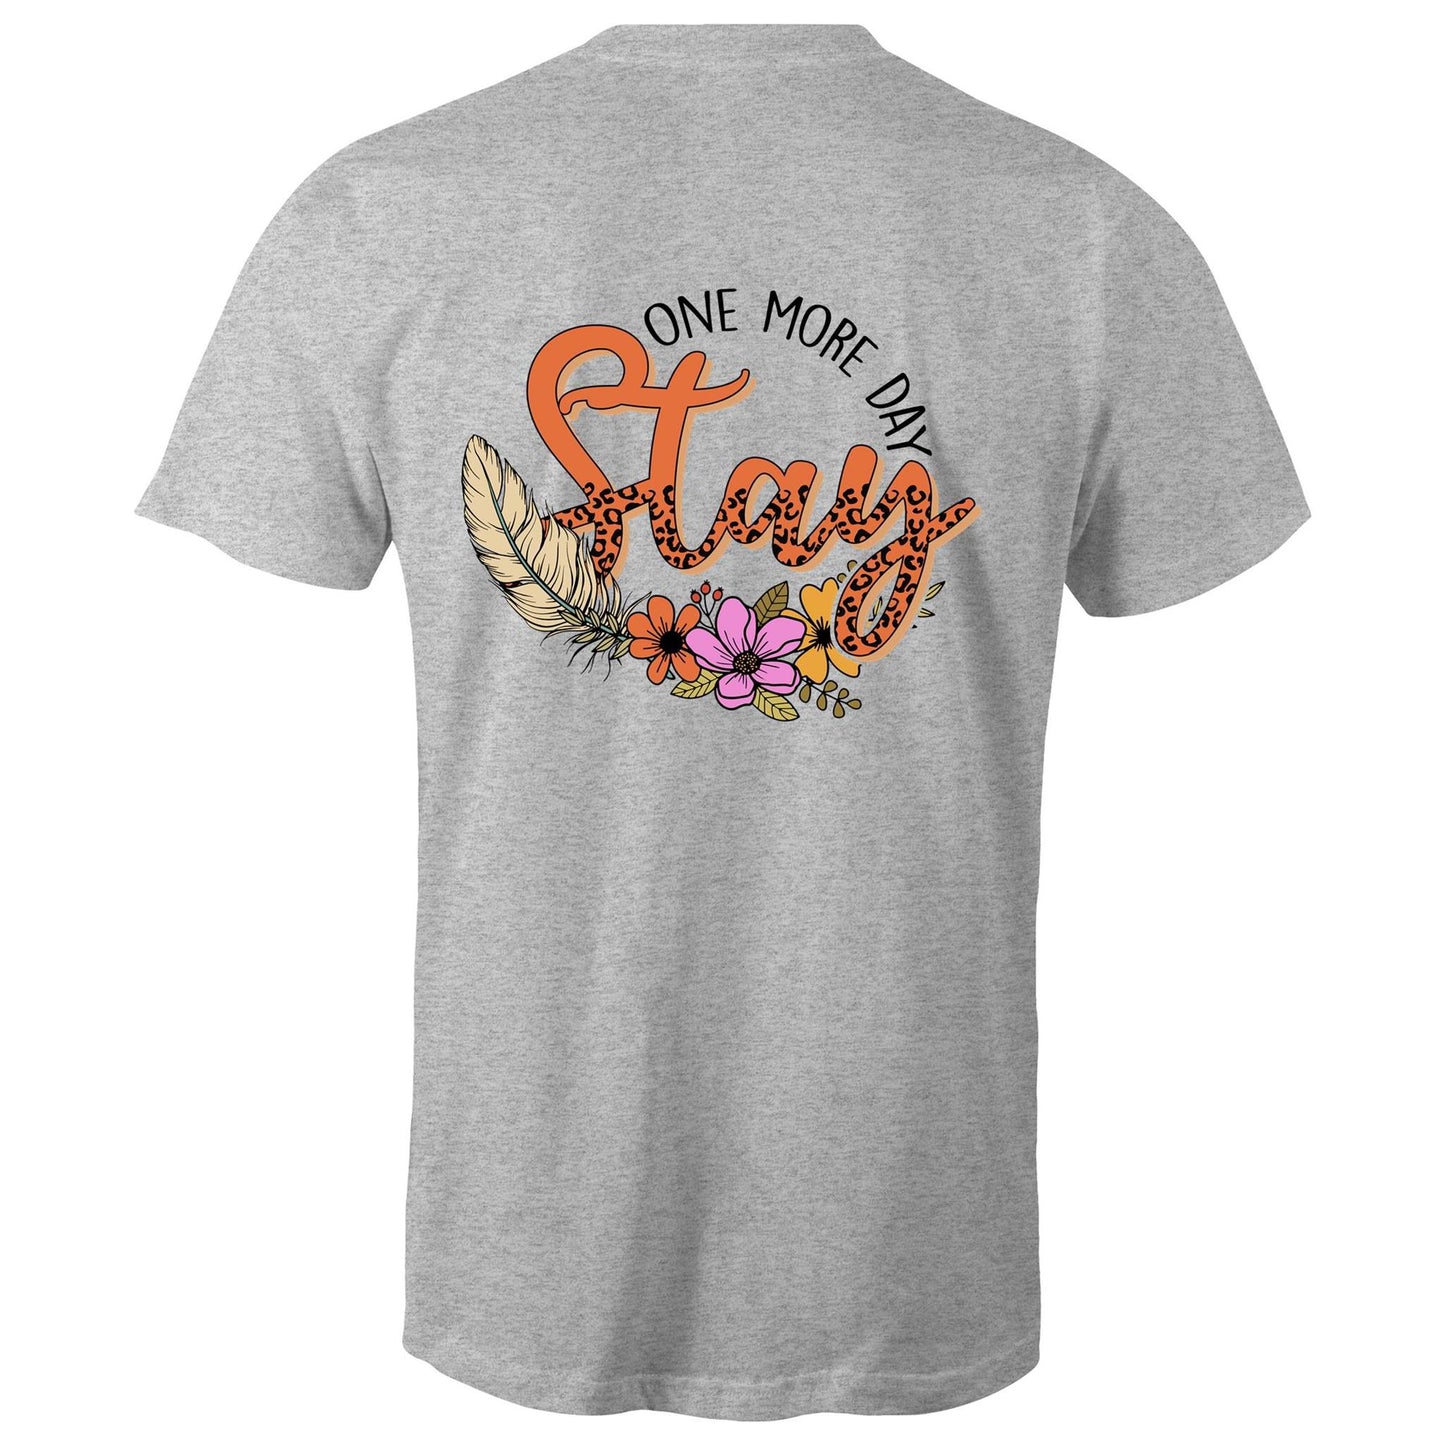 Mens T-Shirt - BACK - Stay One More Day